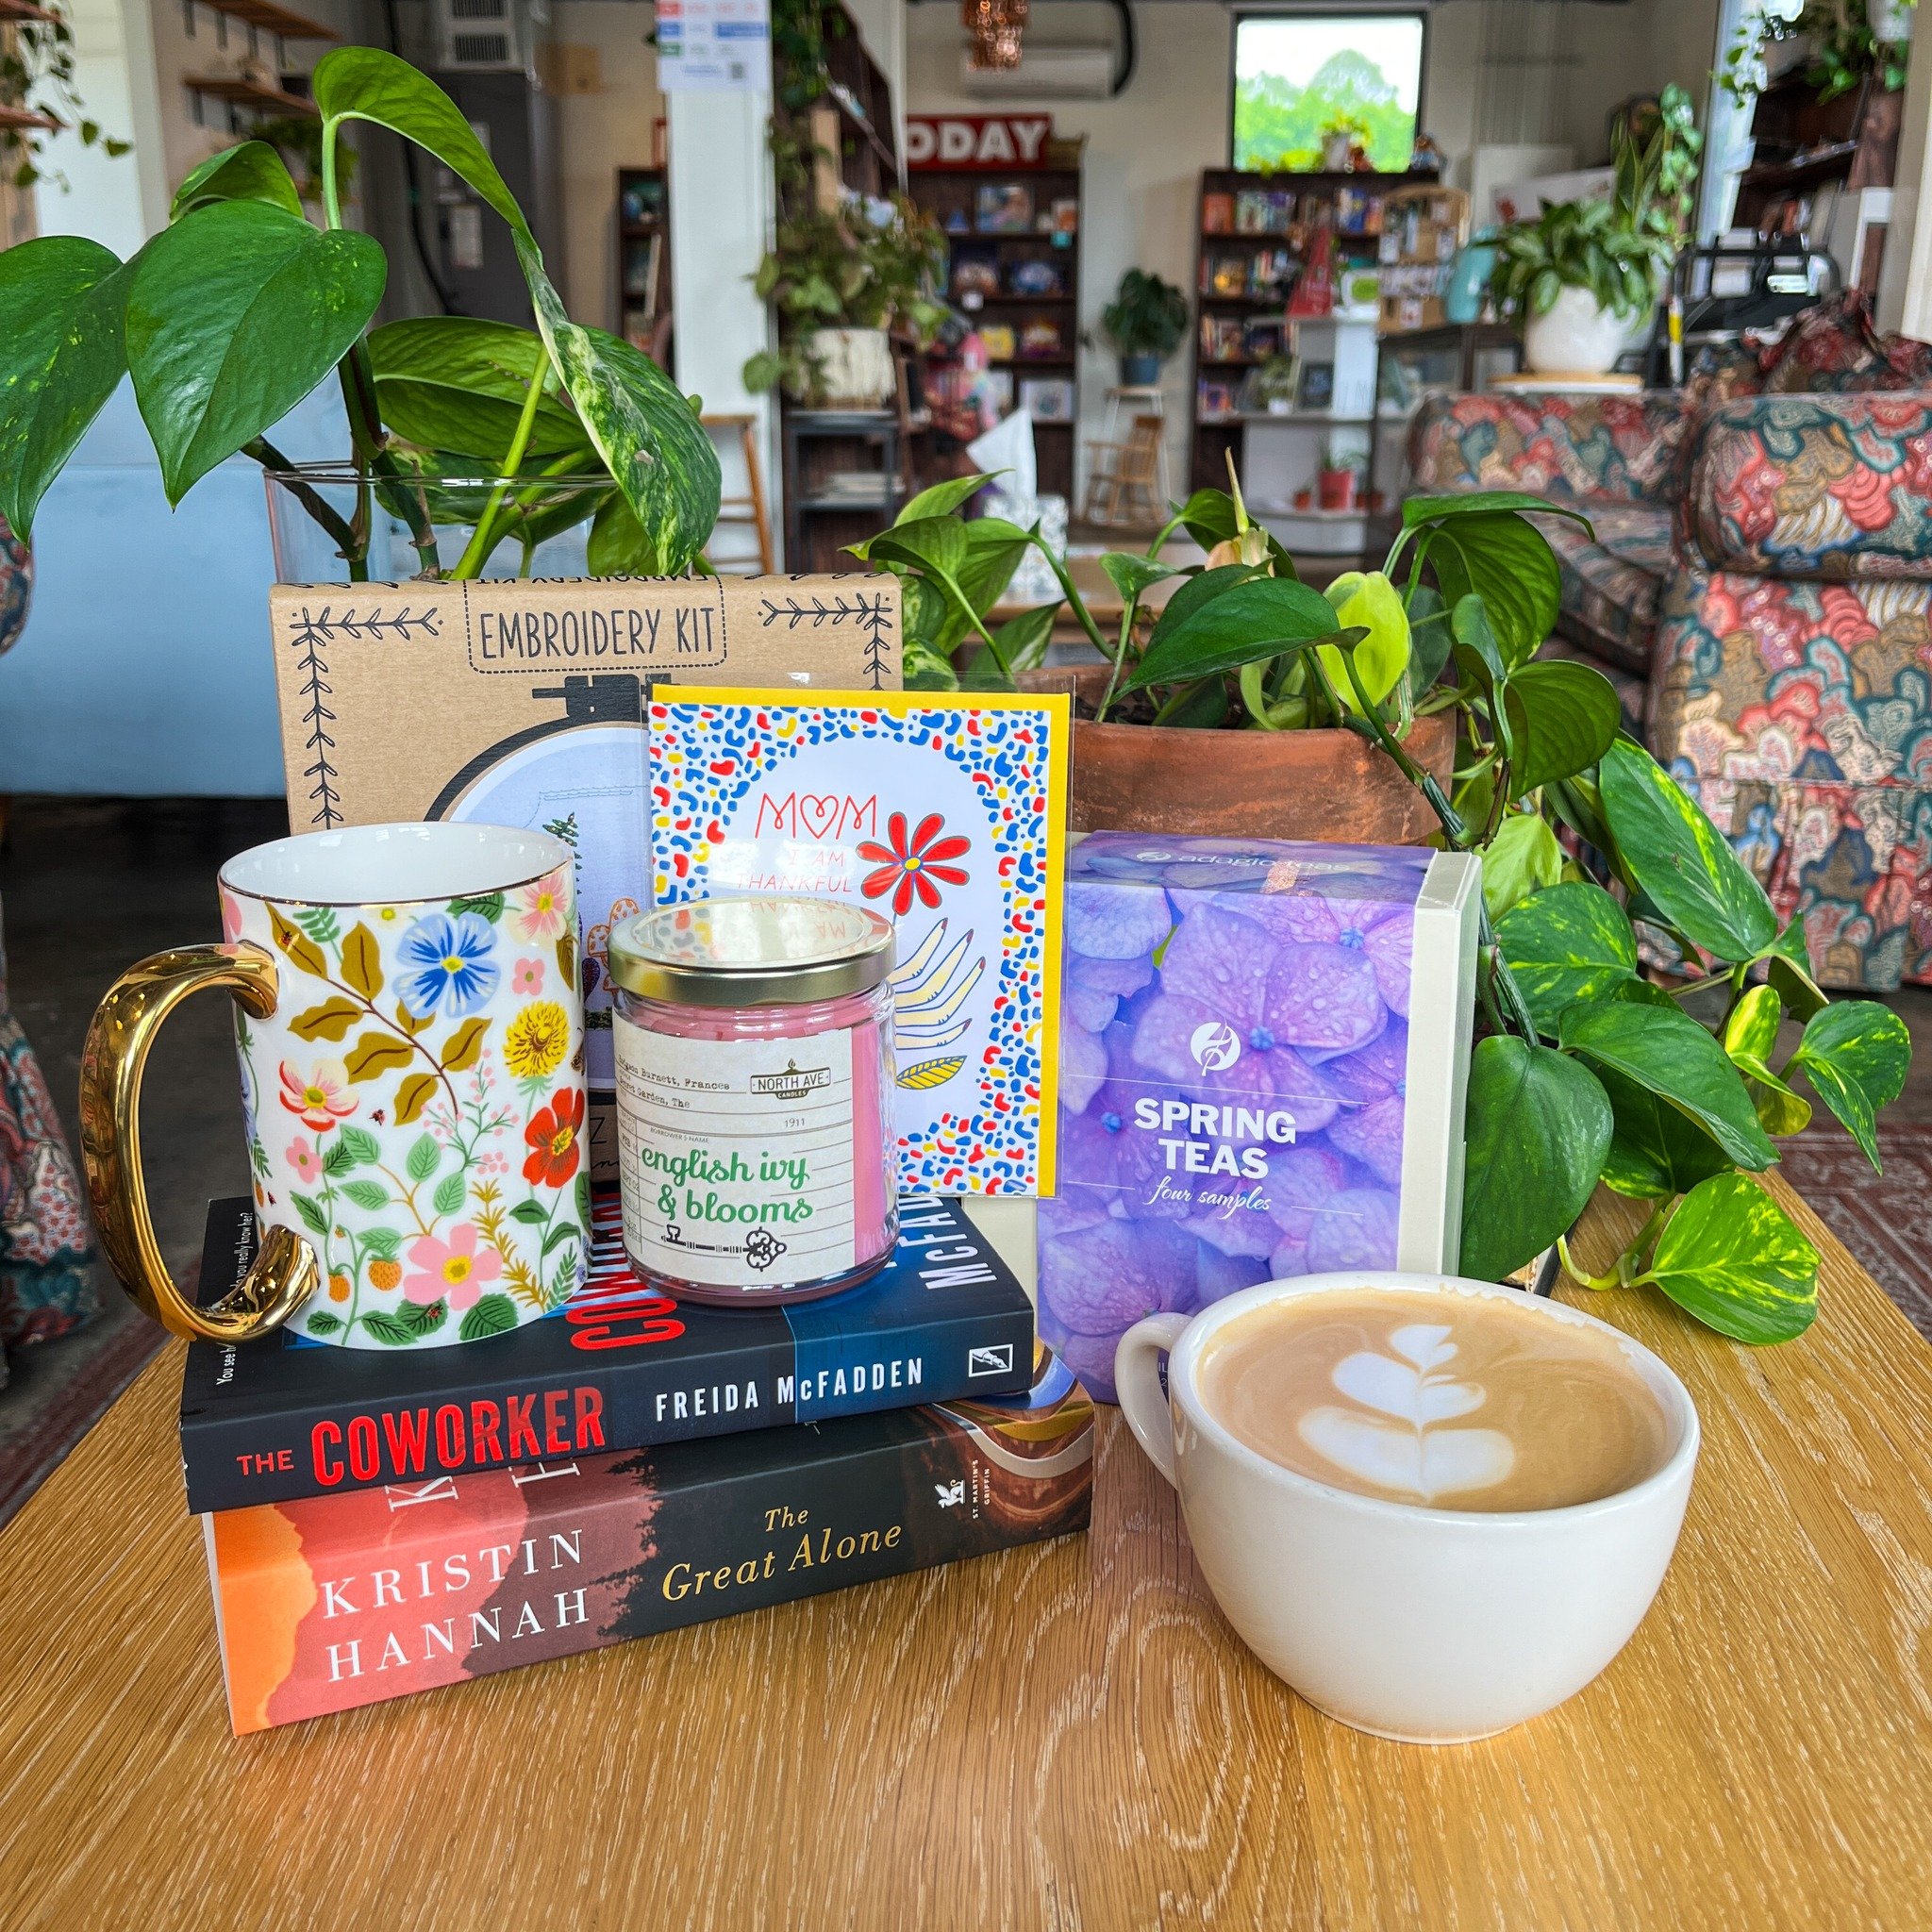 Don't panic! We've got you covered for Mother's Day! 🌼

It's not too late to treat Mom like the queen she is! Swing by Verb Bookstore and Cafe, anytime this week to snag all of her favorites. From cozy reads to delightful trinkets, we've got somethi